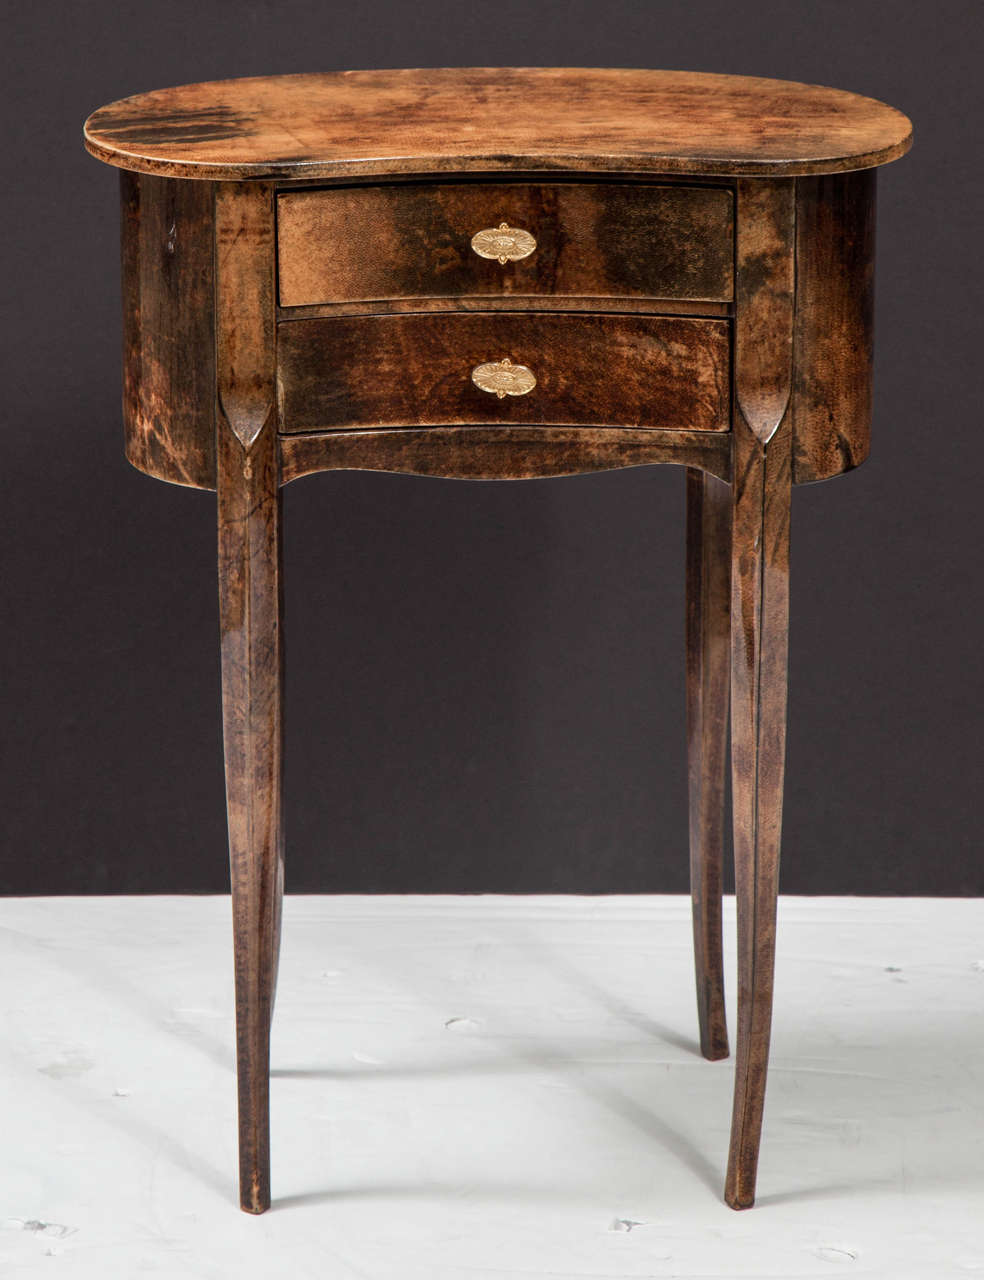 Rare side table covered with parchment designed by Aldo Tura.